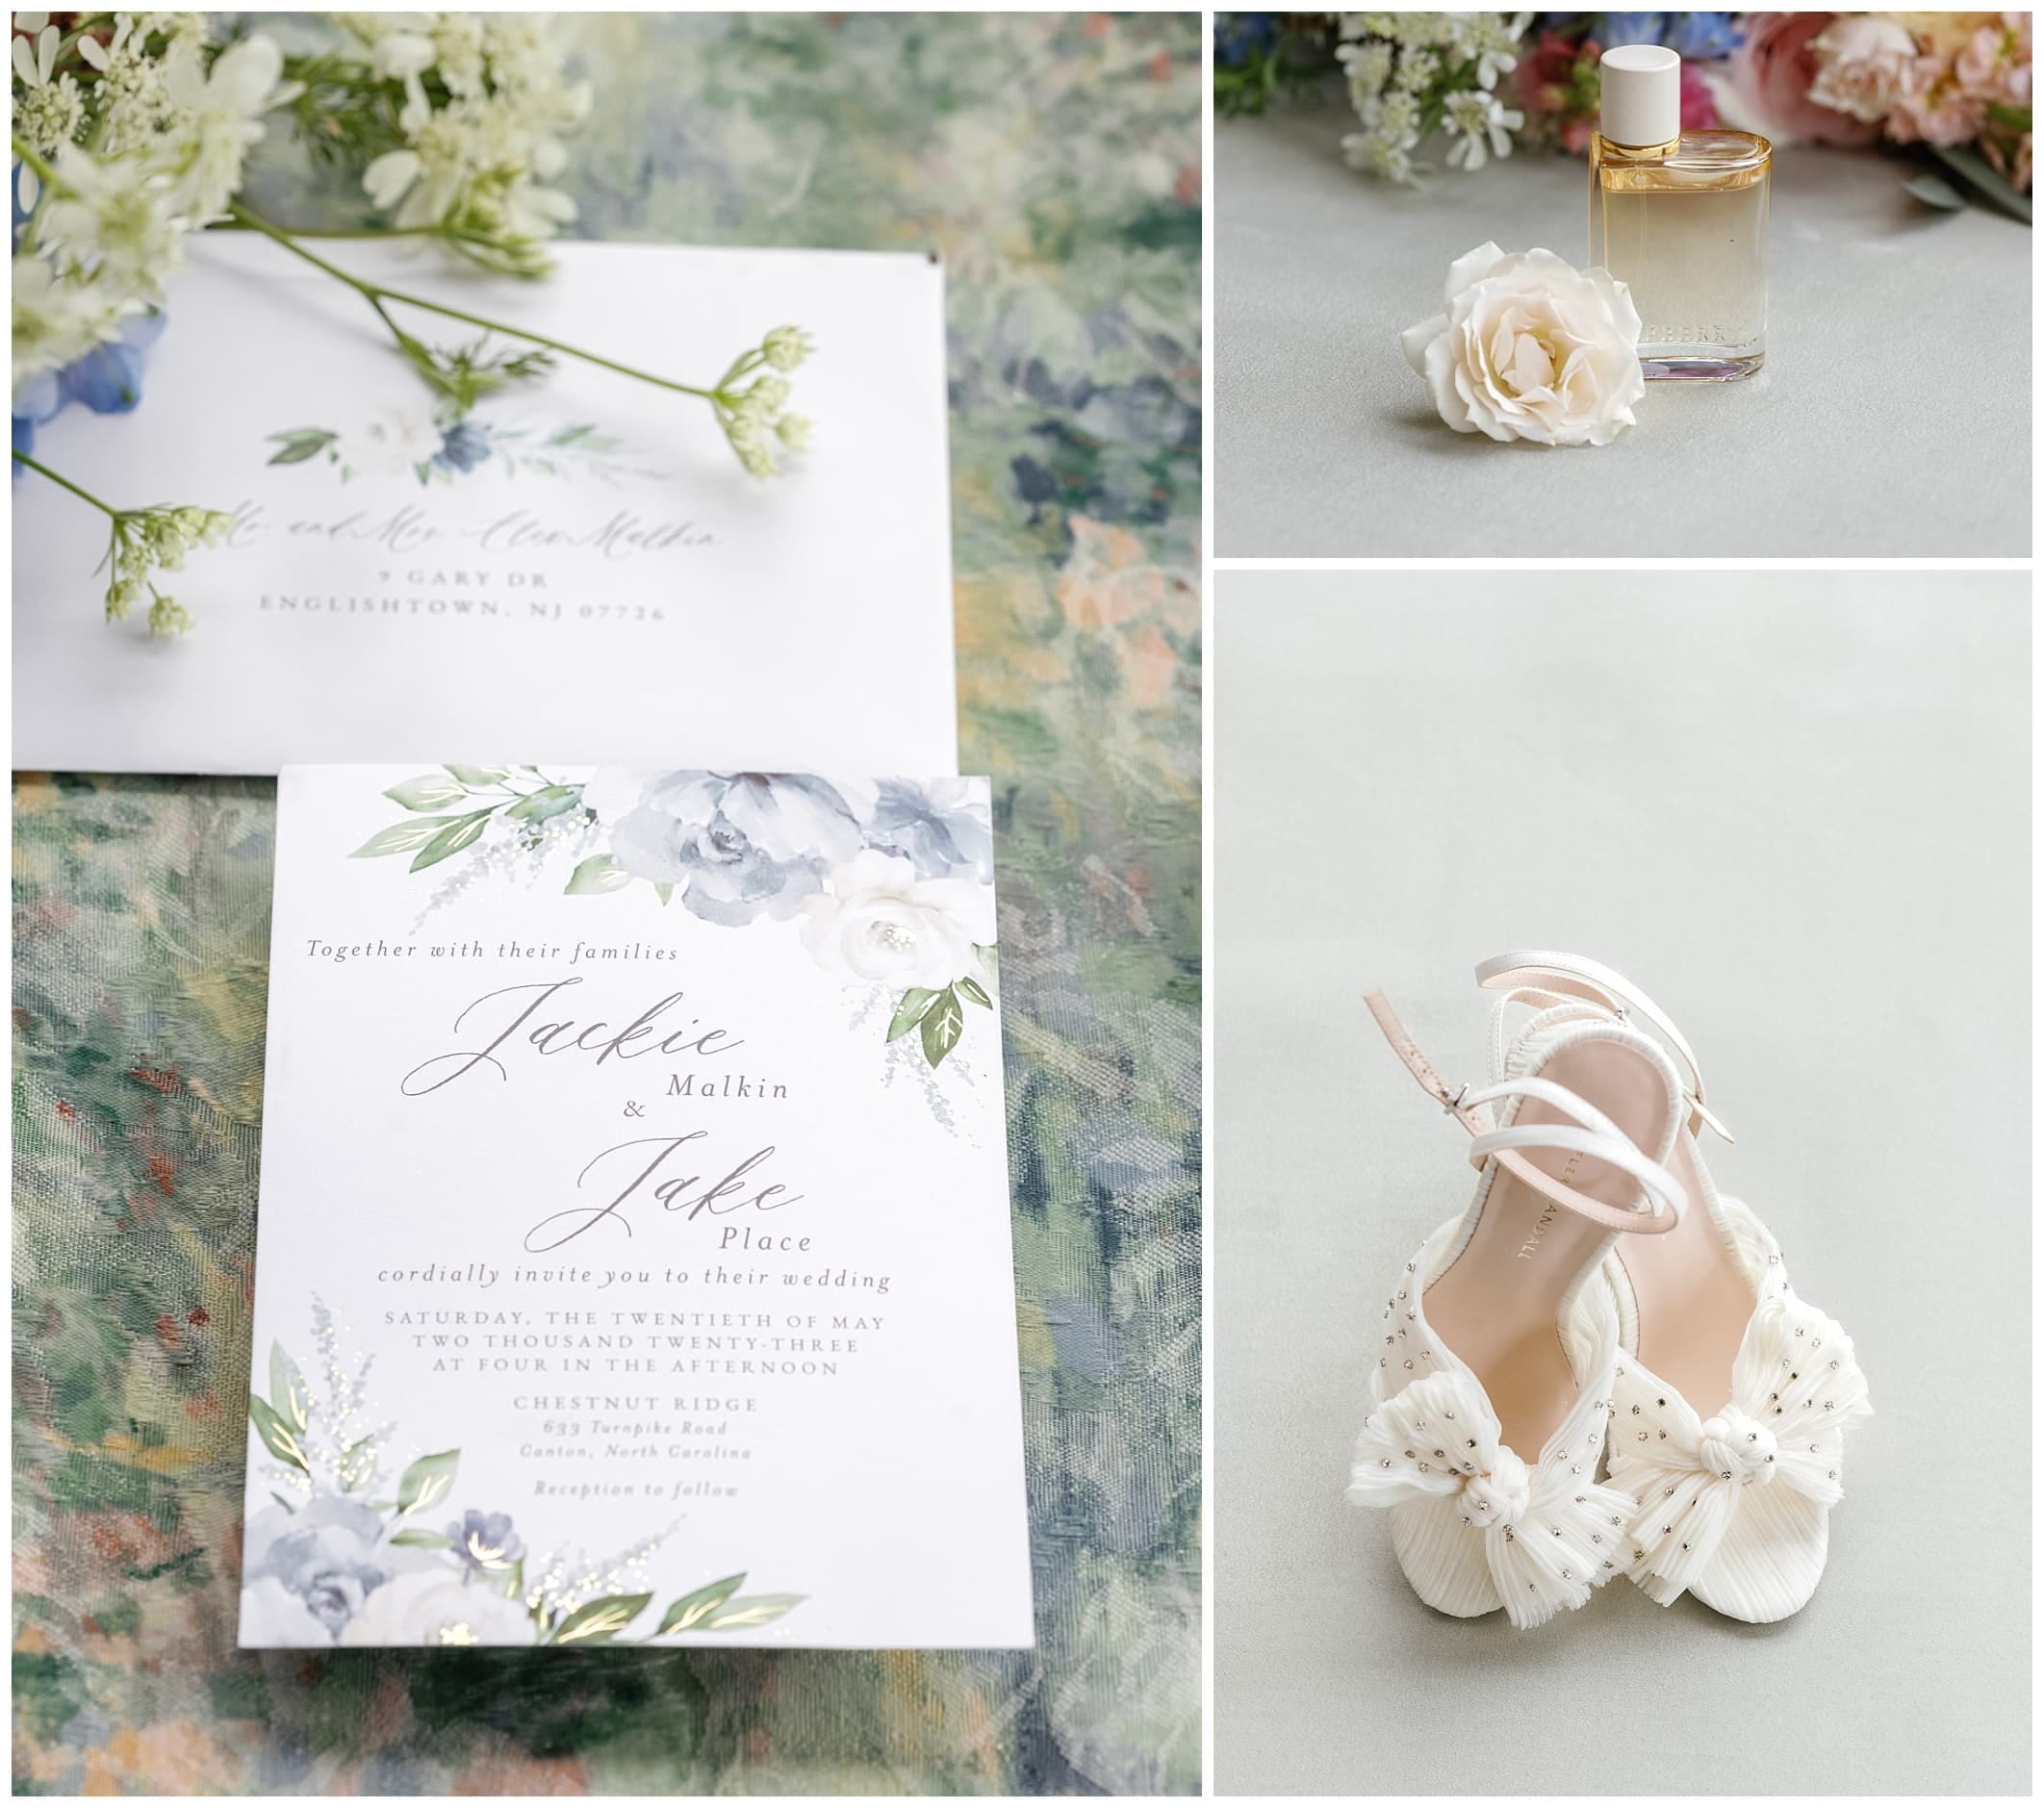 Detail photos of invitation suite, bride's shoes and perfume on Monet inspired backdrop.